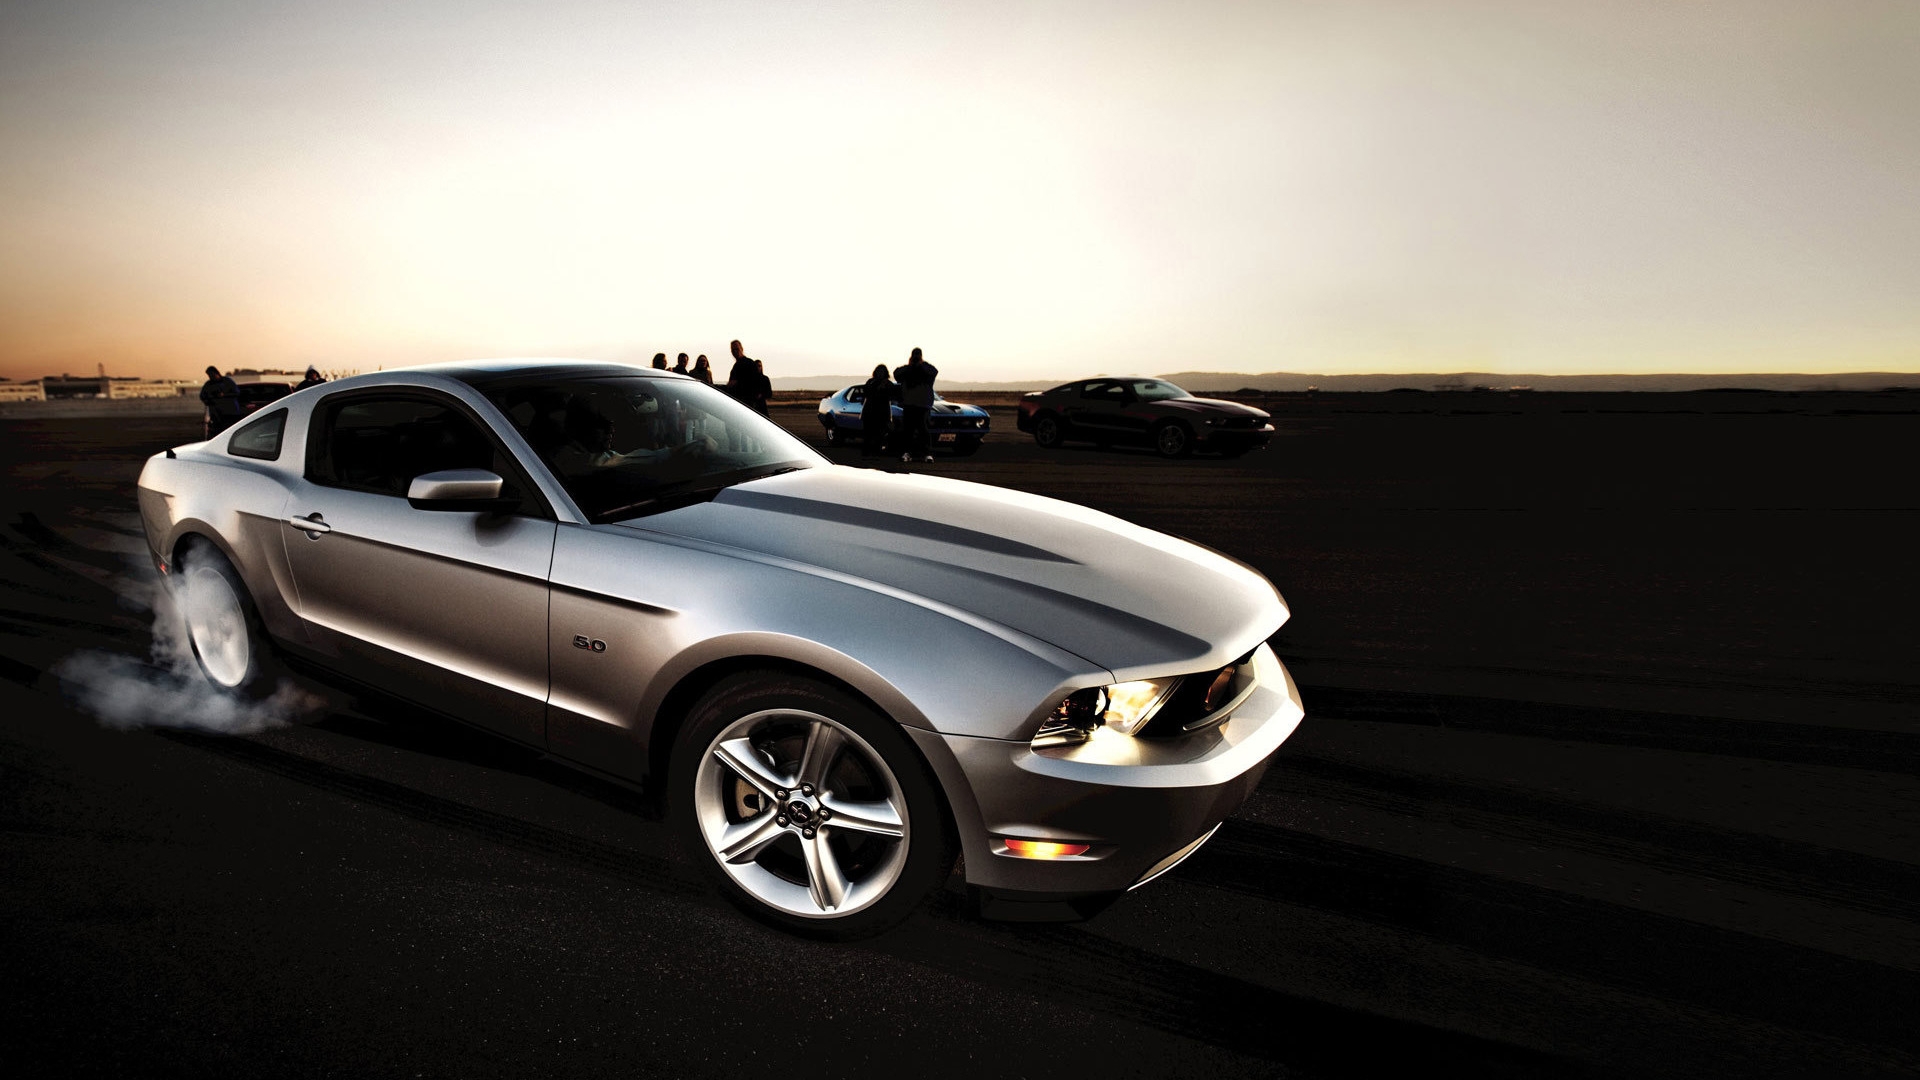 Silver Ford Mustang for 1920 x 1080 HDTV 1080p resolution